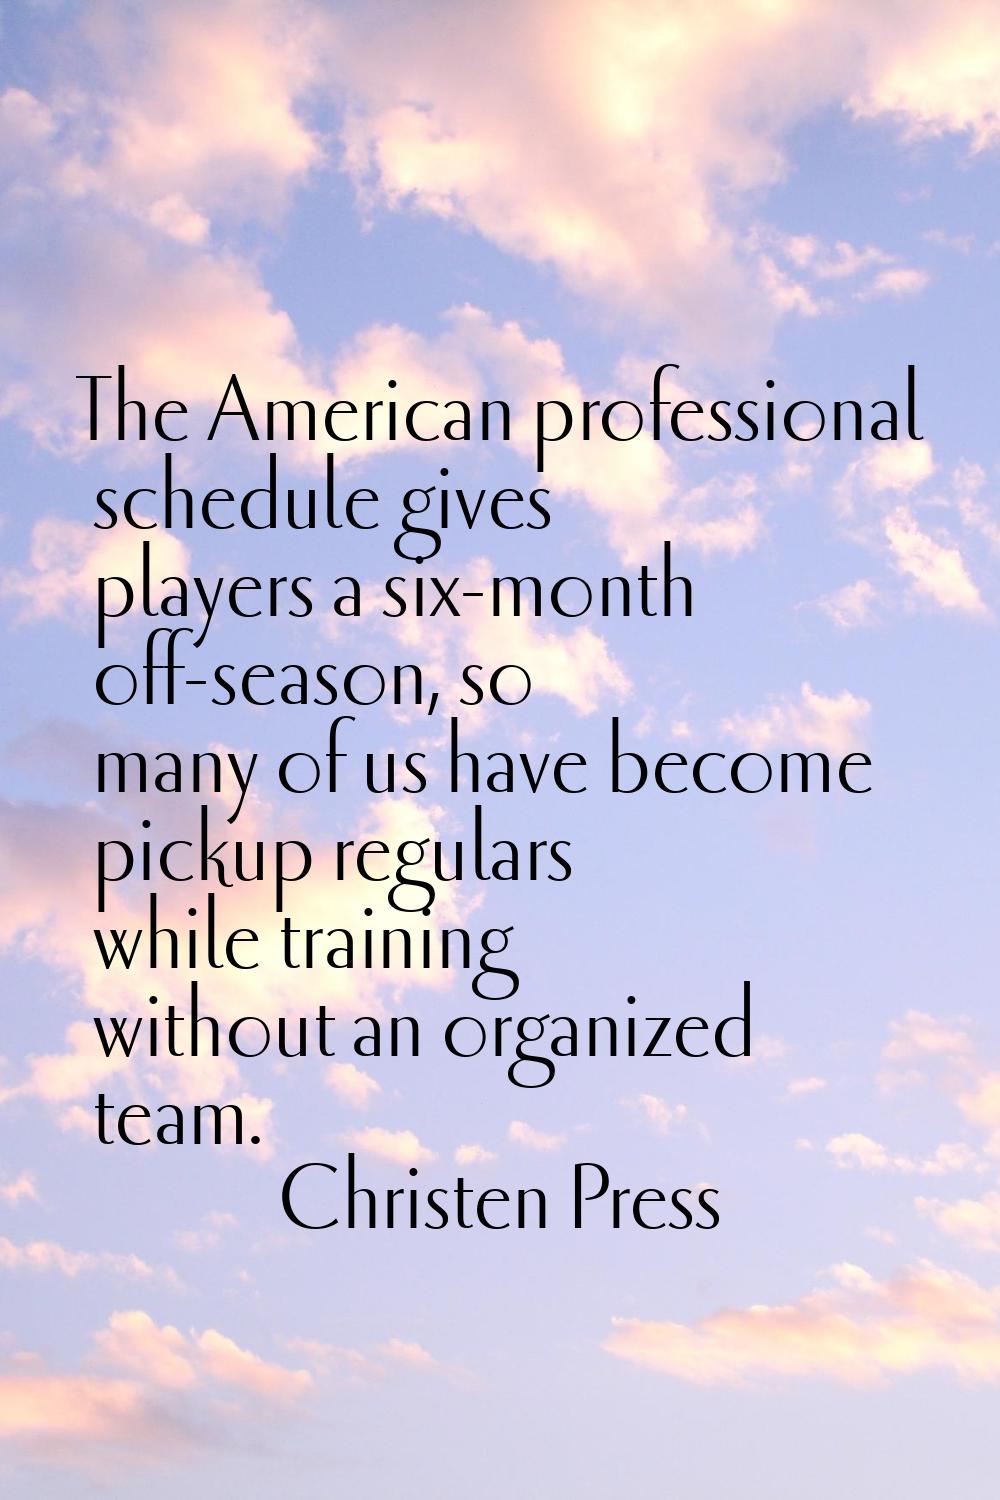 The American professional schedule gives players a six-month off-season, so many of us have become 